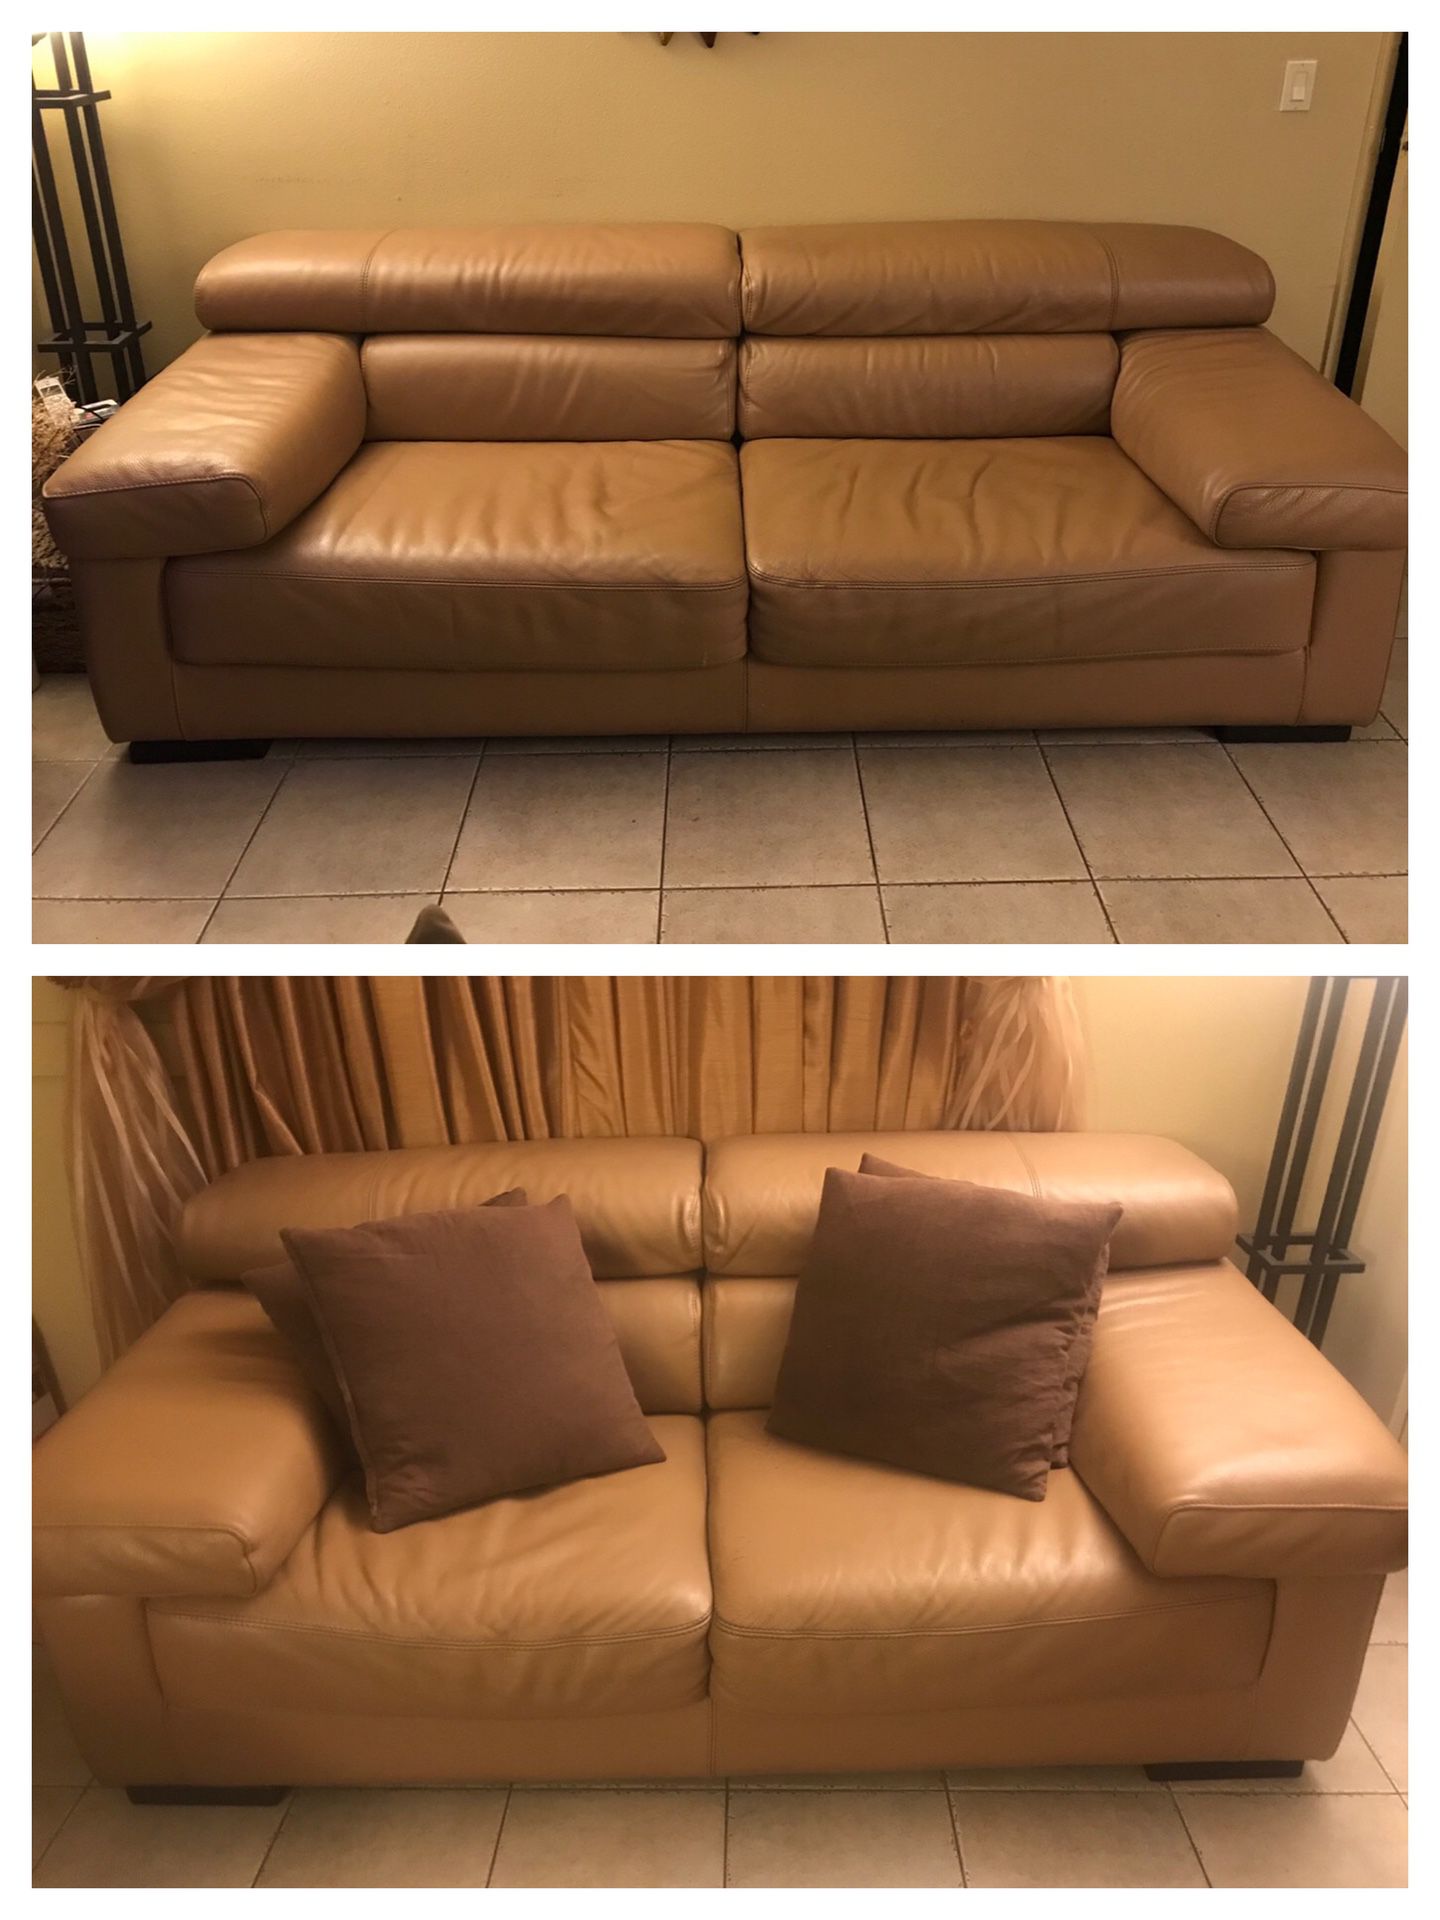 Couches Authentic Genuine Leather Brown Beige - (Set of 2)